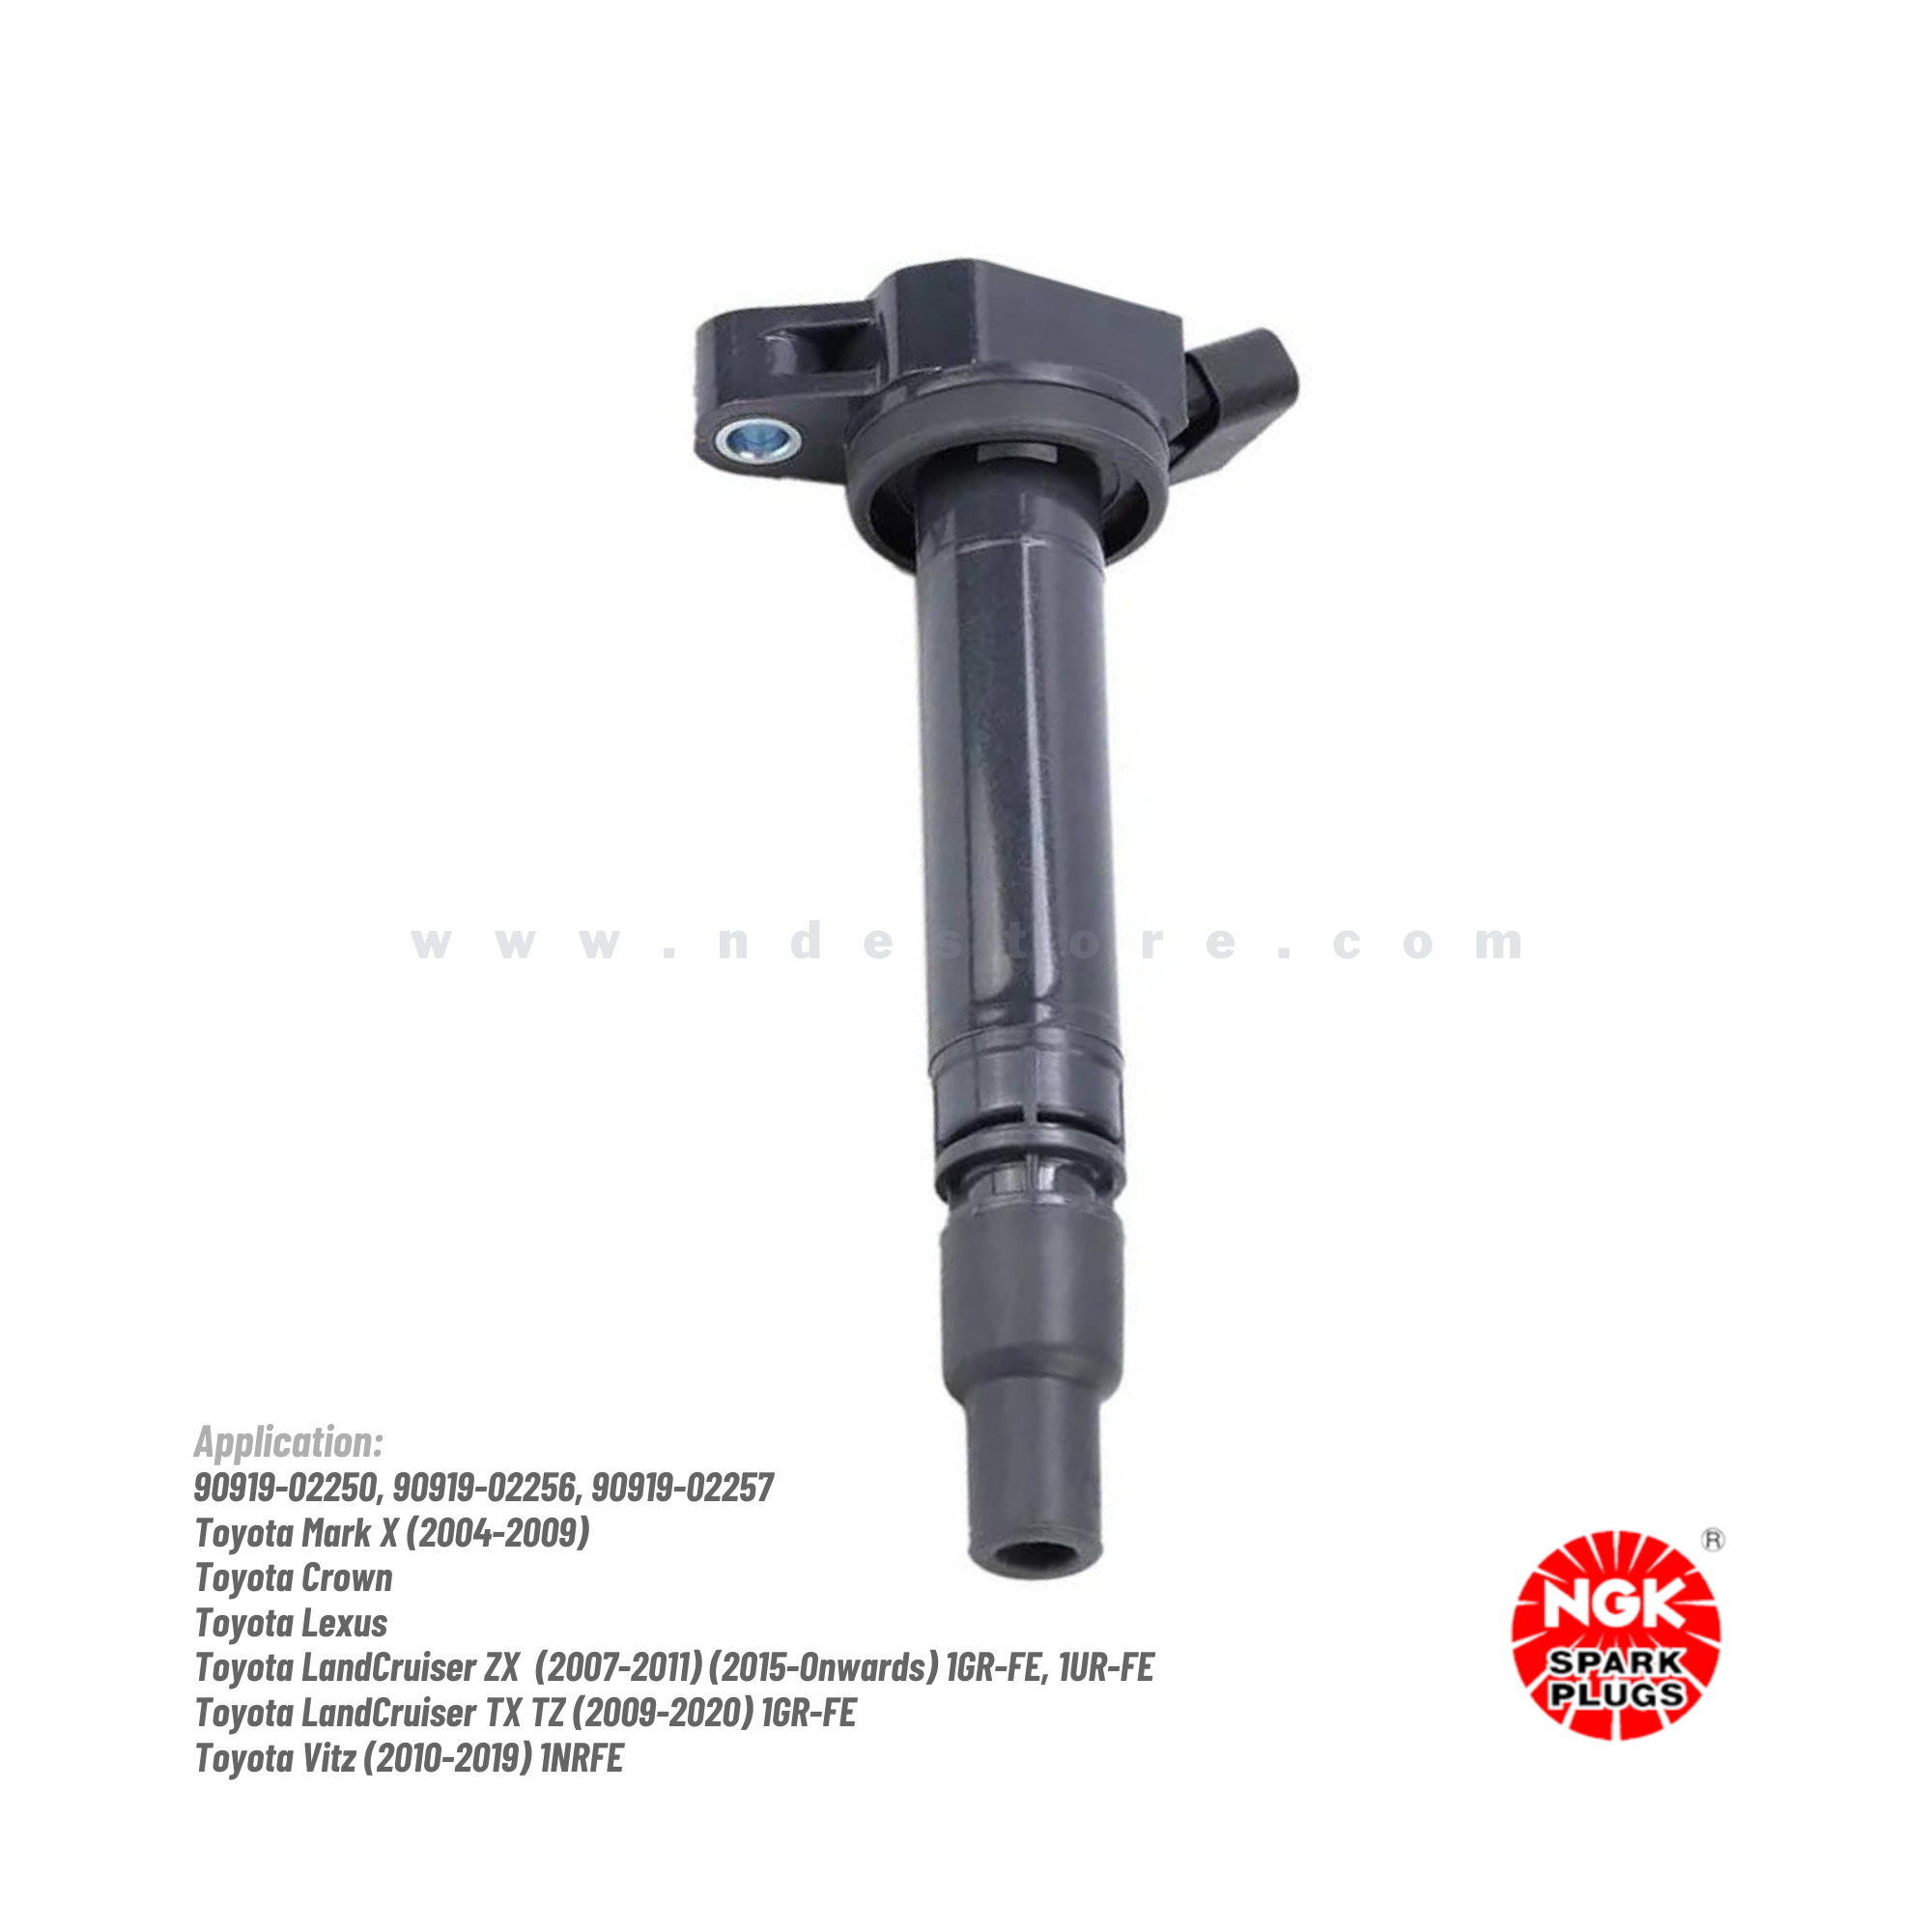 IGNITION COIL NGK PART NO 90919-02250, 90919-02256, 90919-02257